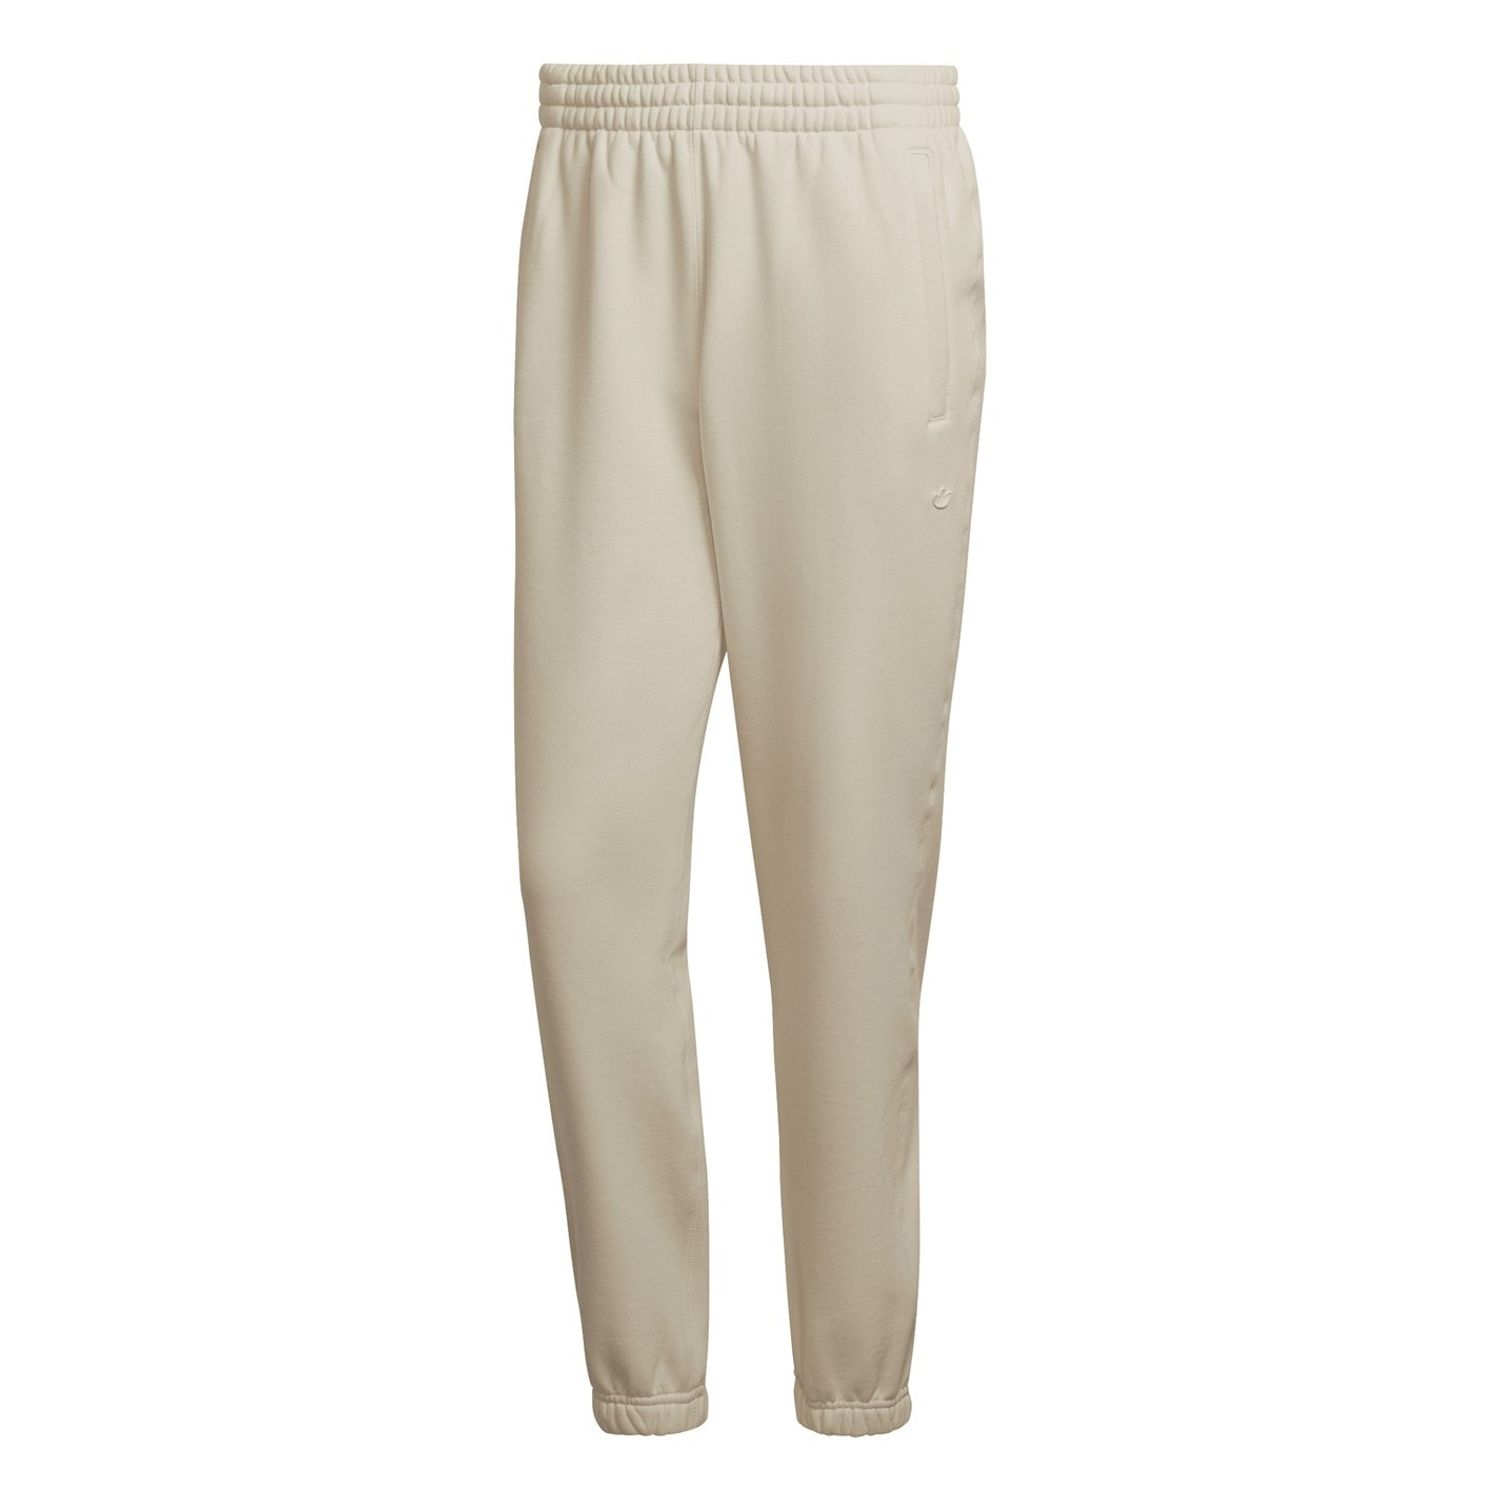 Neutral Adidas Pants for Women